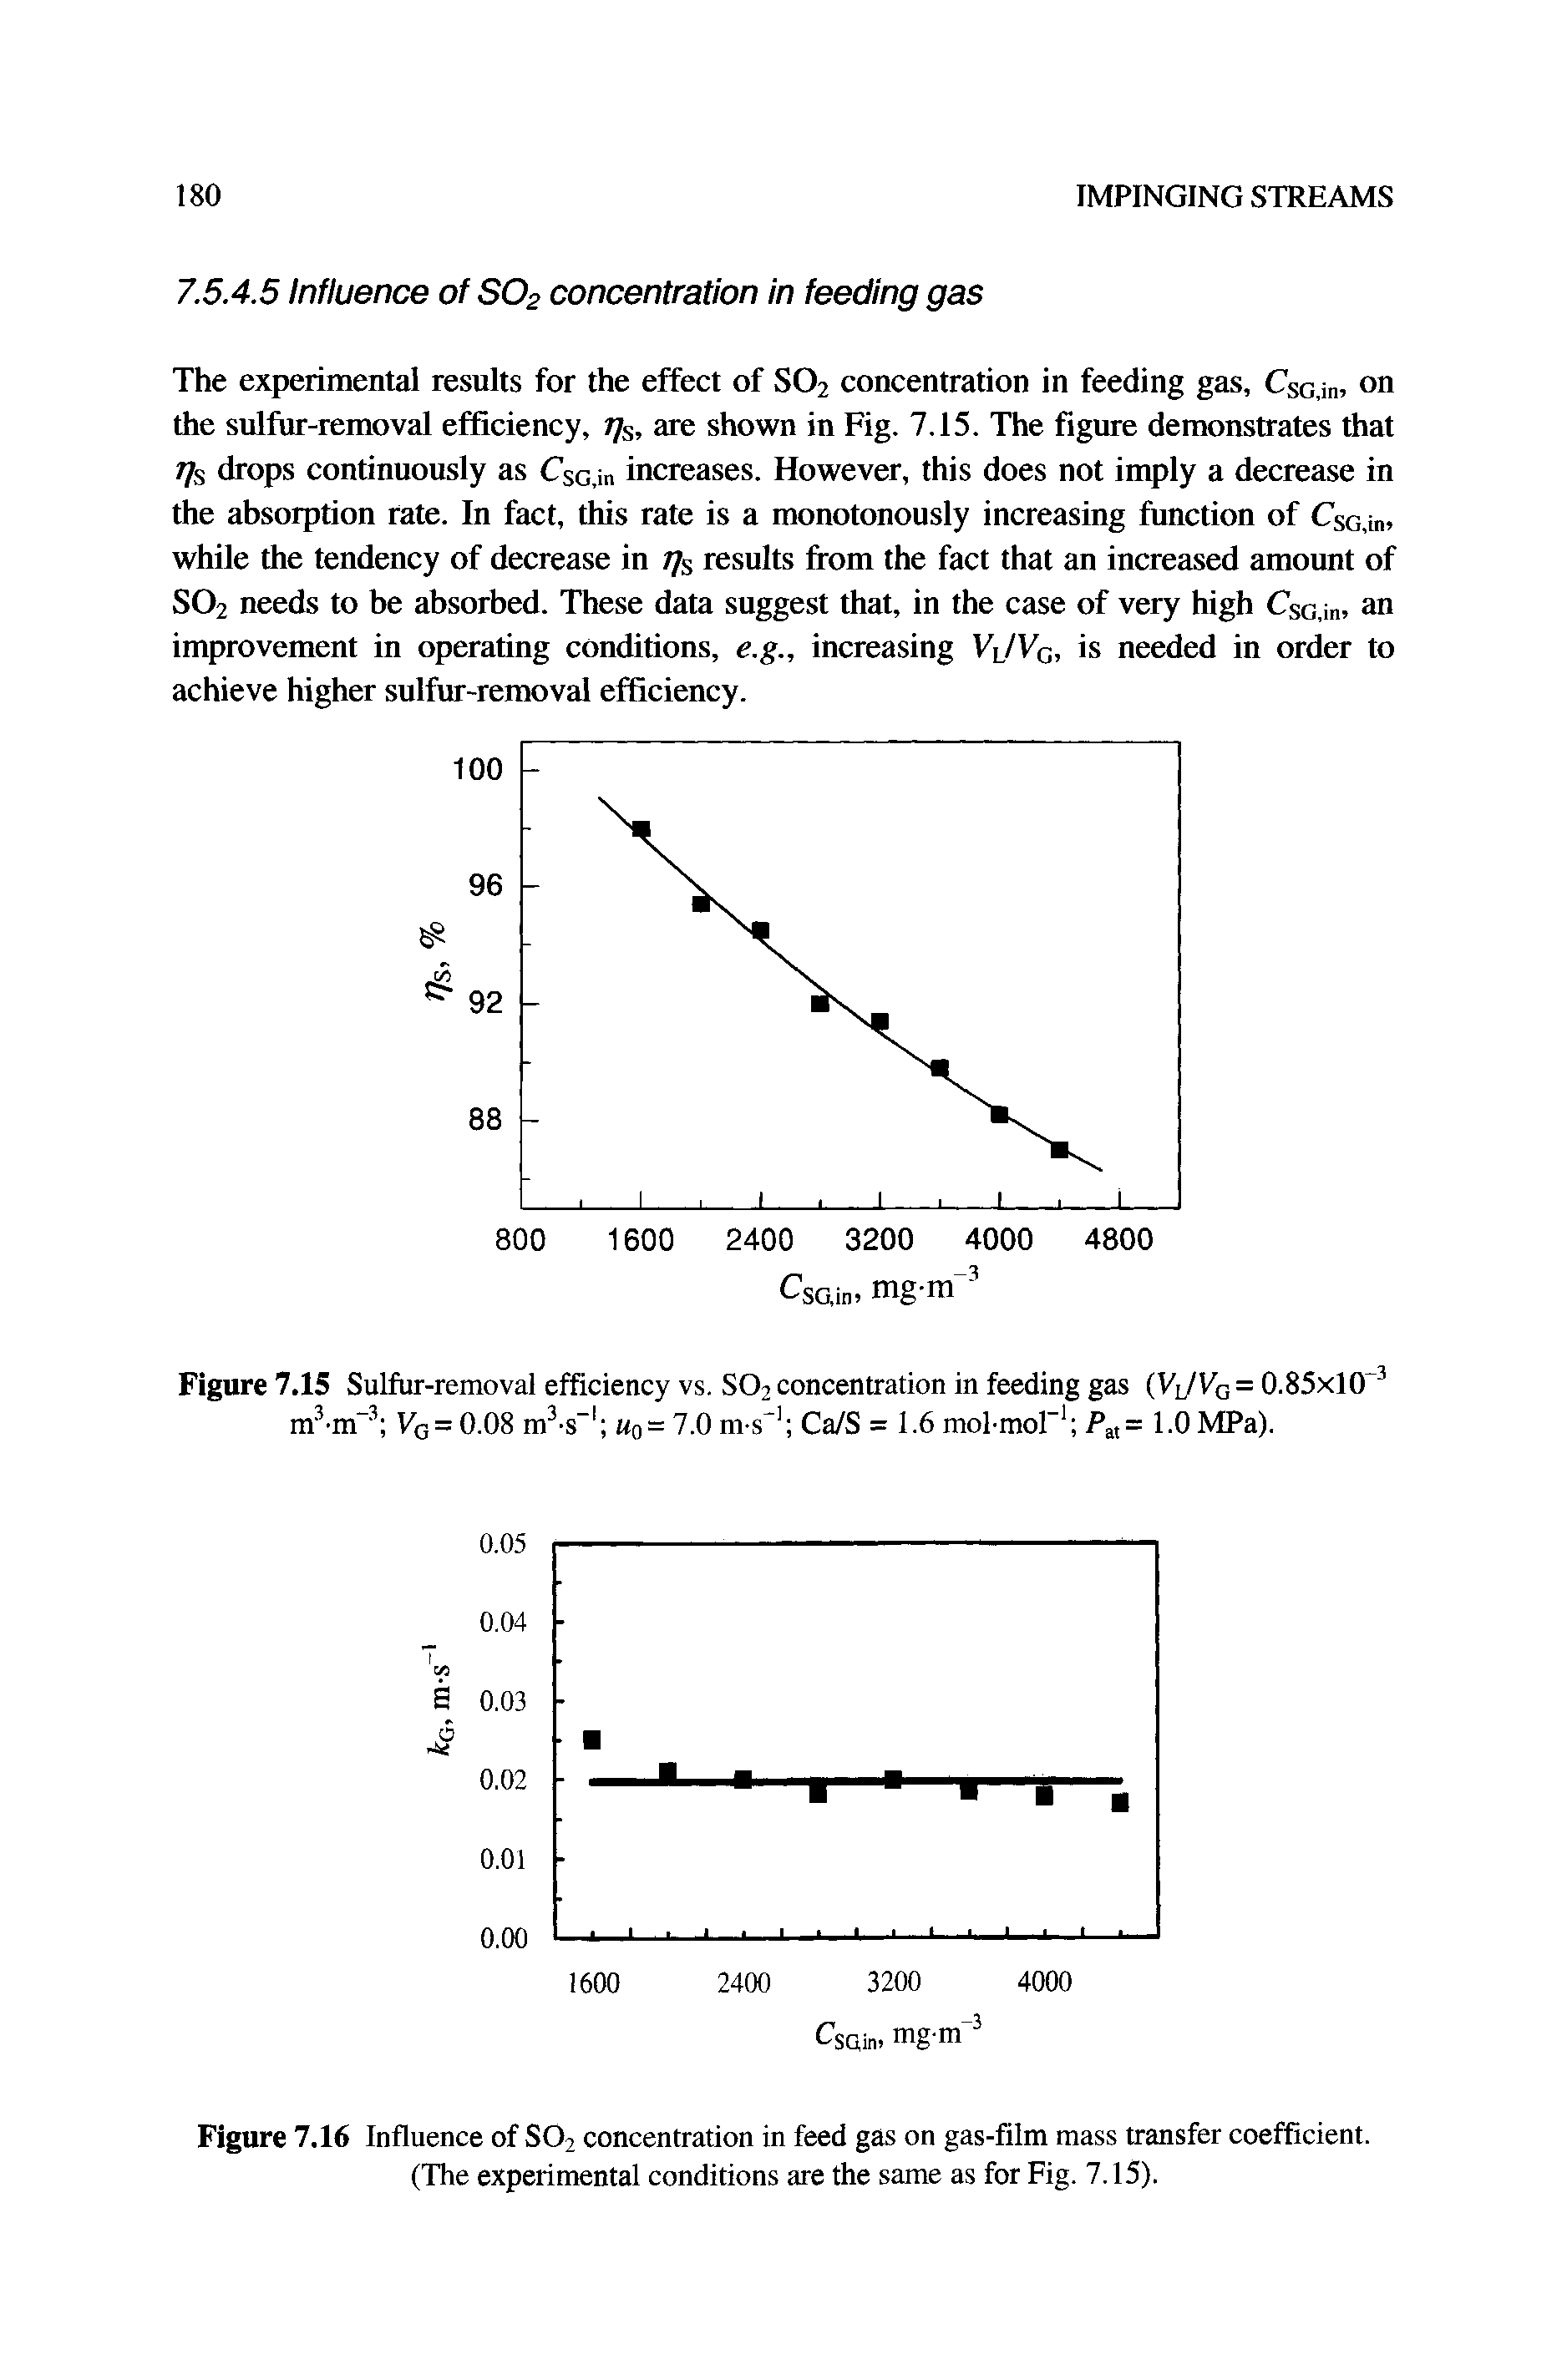 Figure 7.16 Influence of S02 concentration in feed gas on gas-film mass transfer coefficient. (The experimental conditions are the same as for Fig. 7.15).